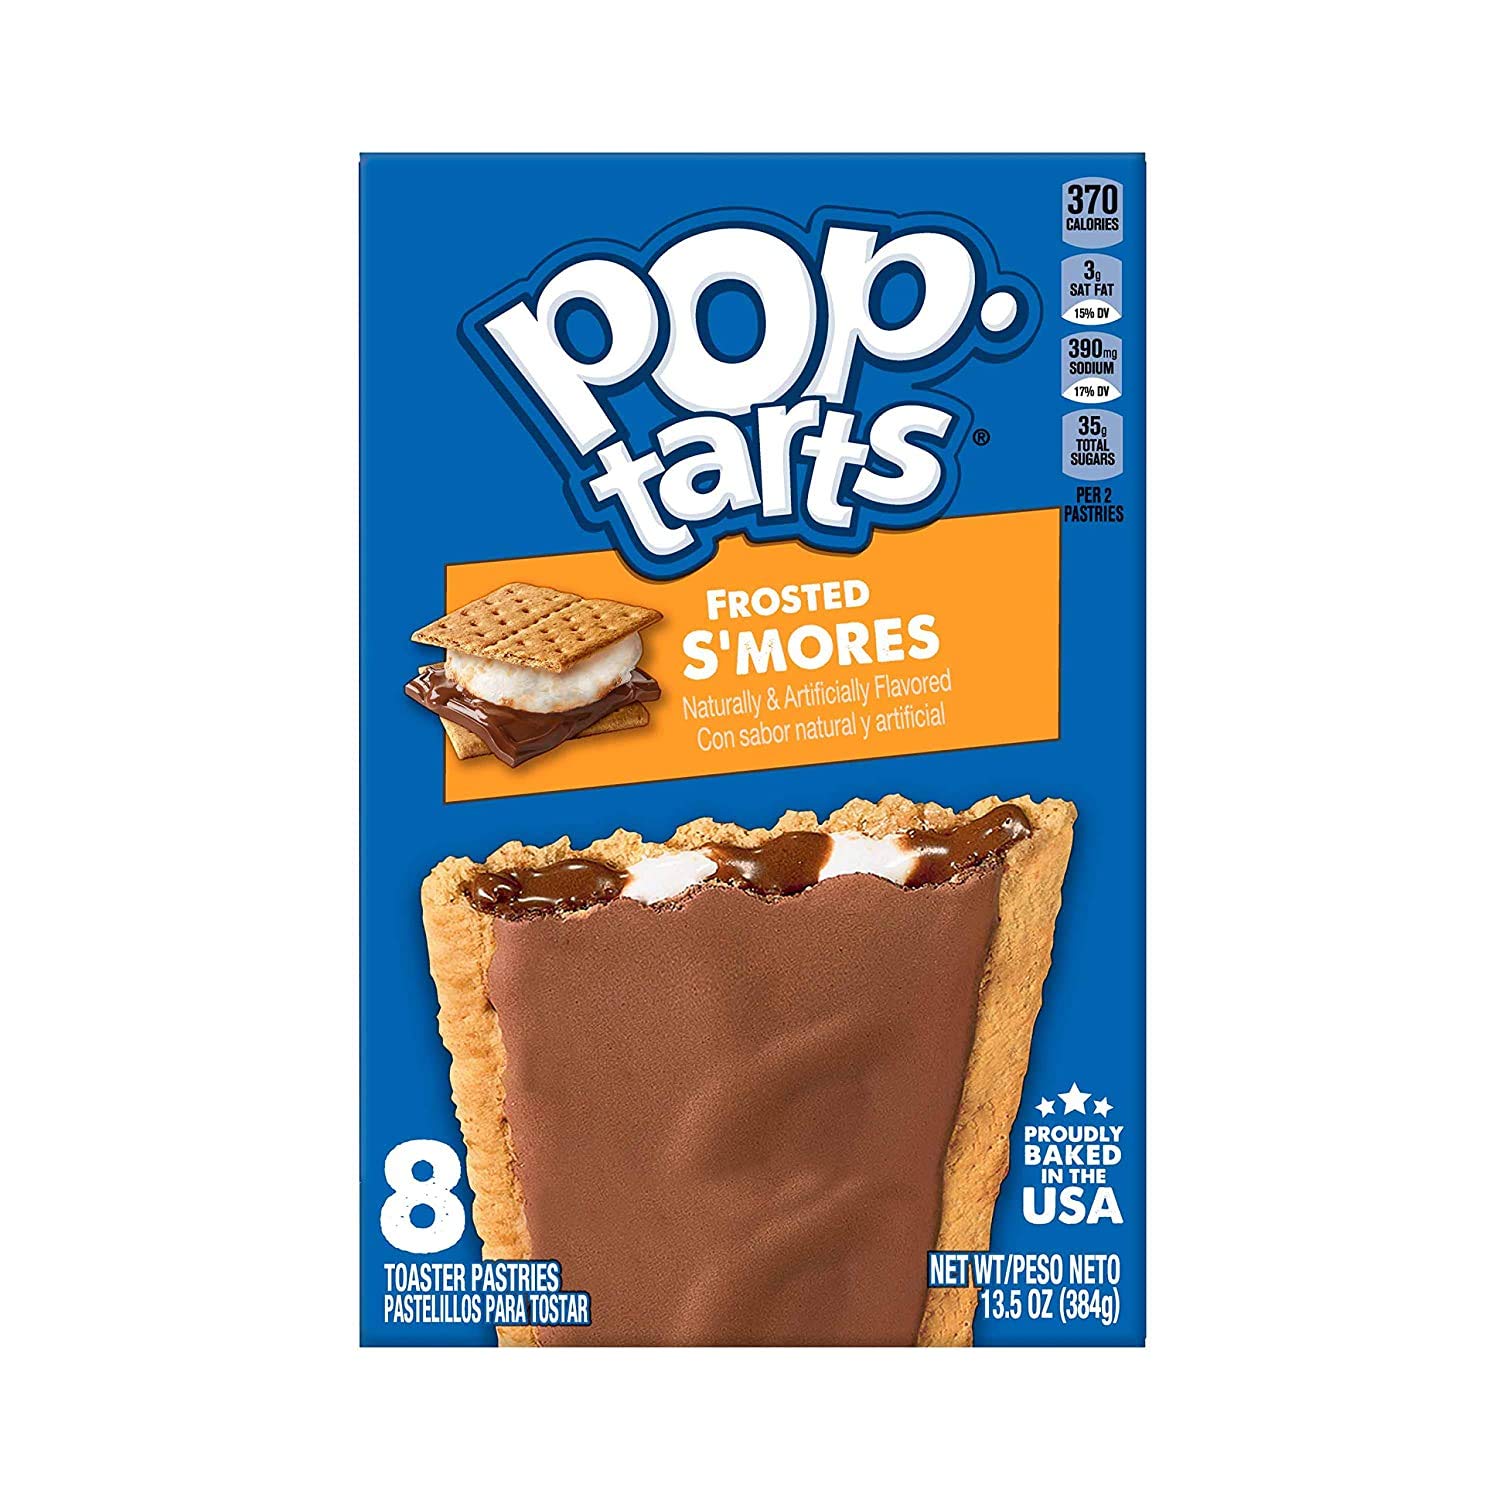 Pop Tarts Frosted S'Mores Image